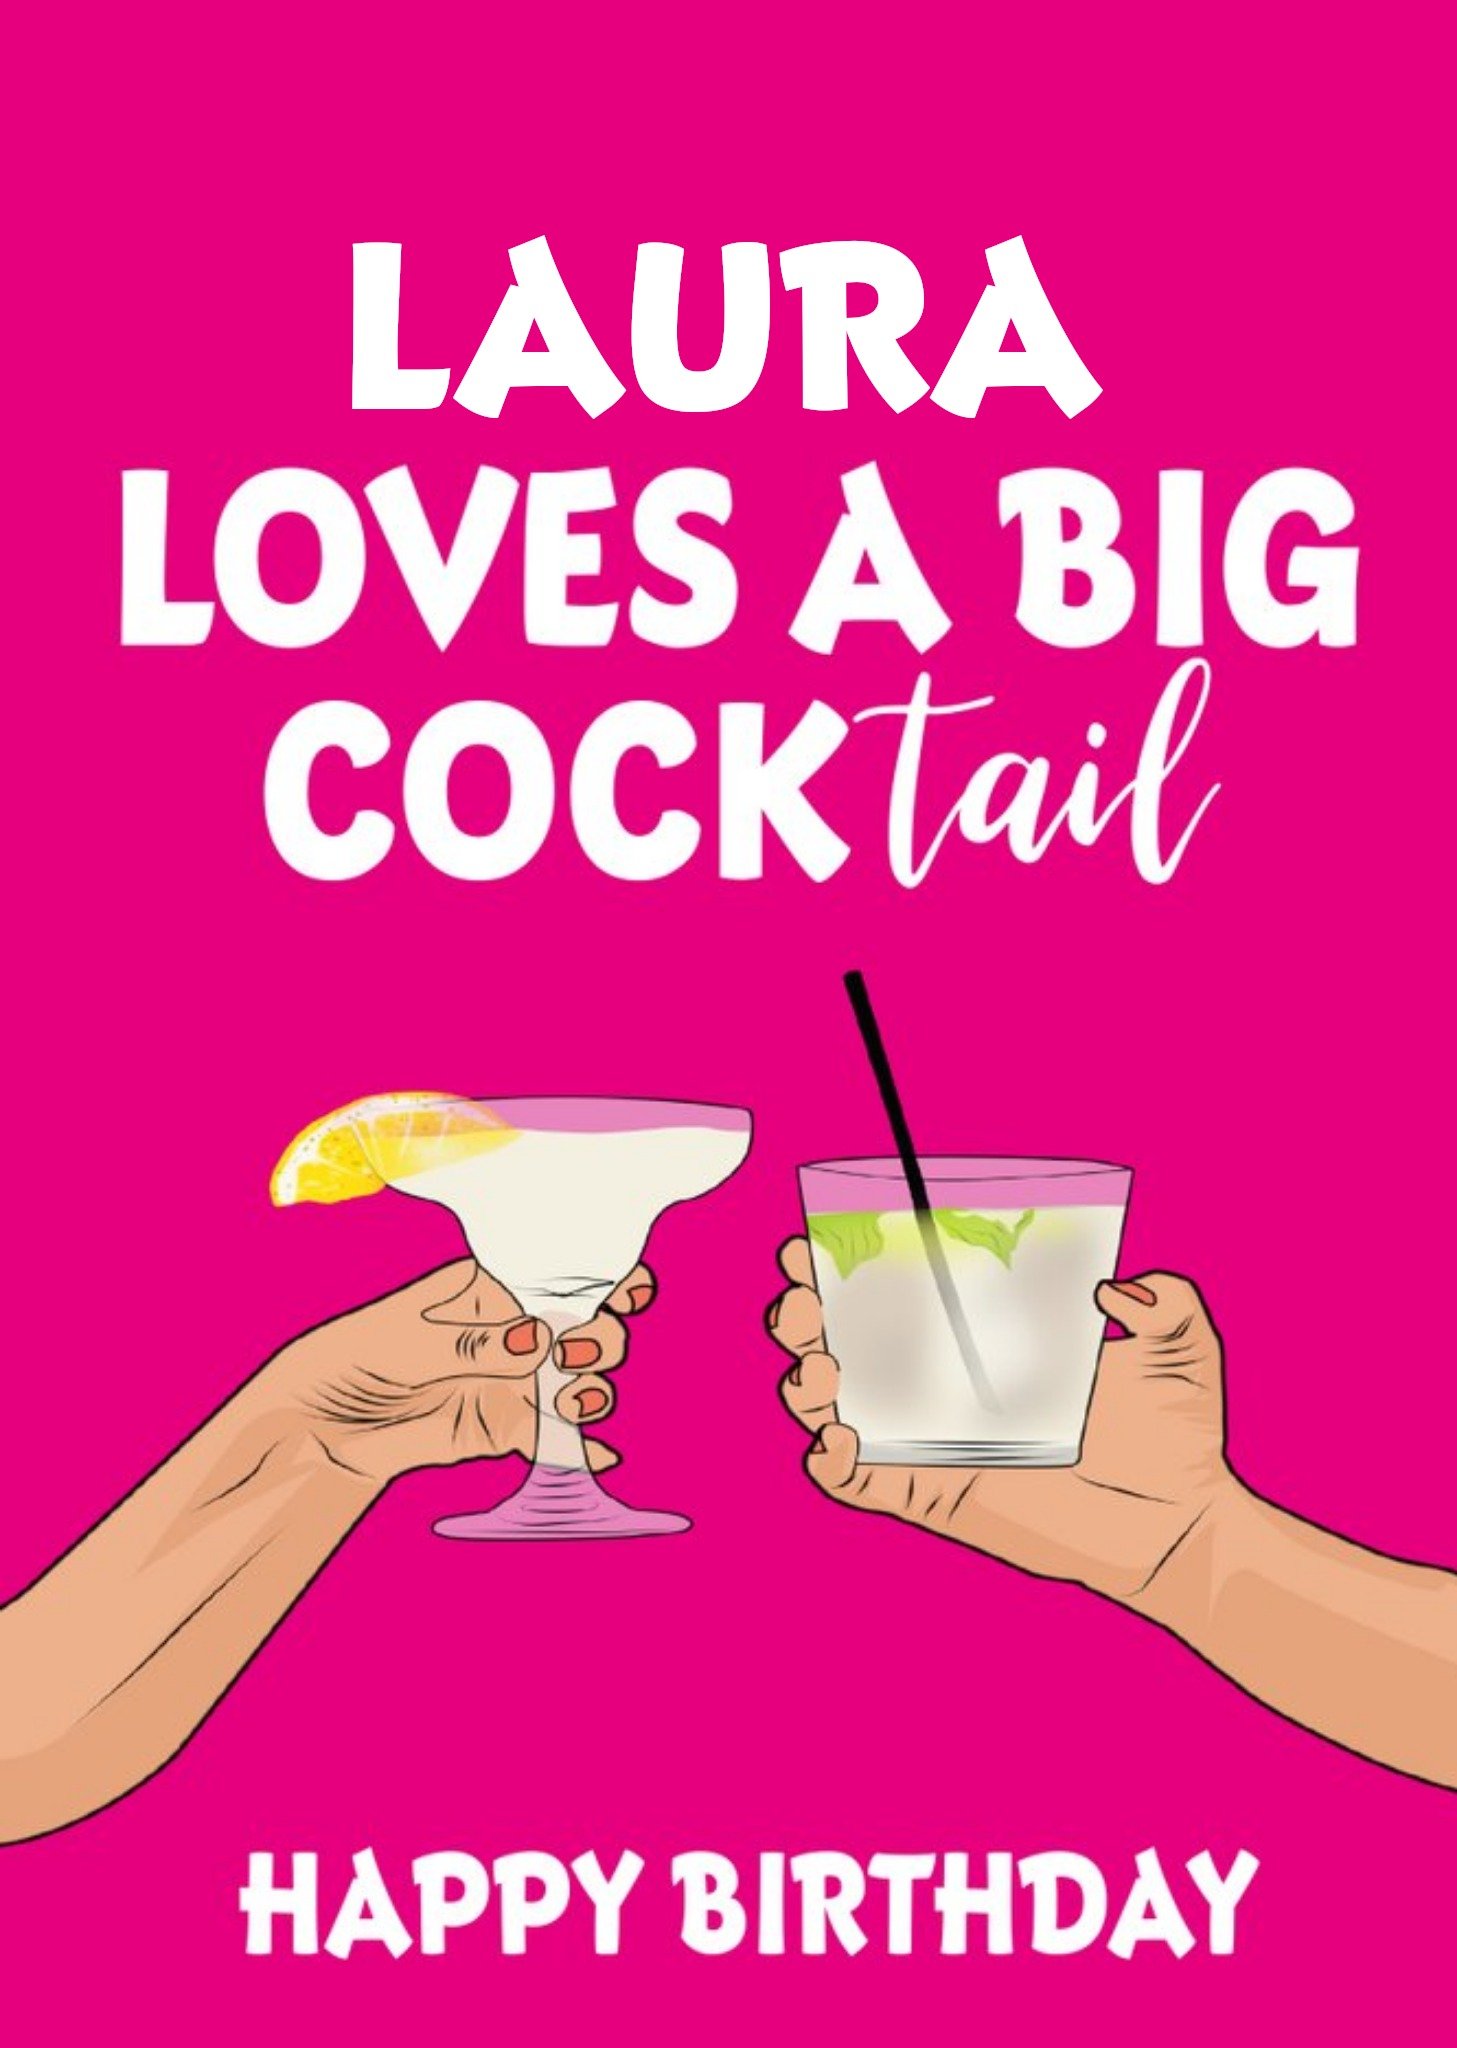 Moonpig Funny Laura Loves A Big Cocktail Personalised Card, Large